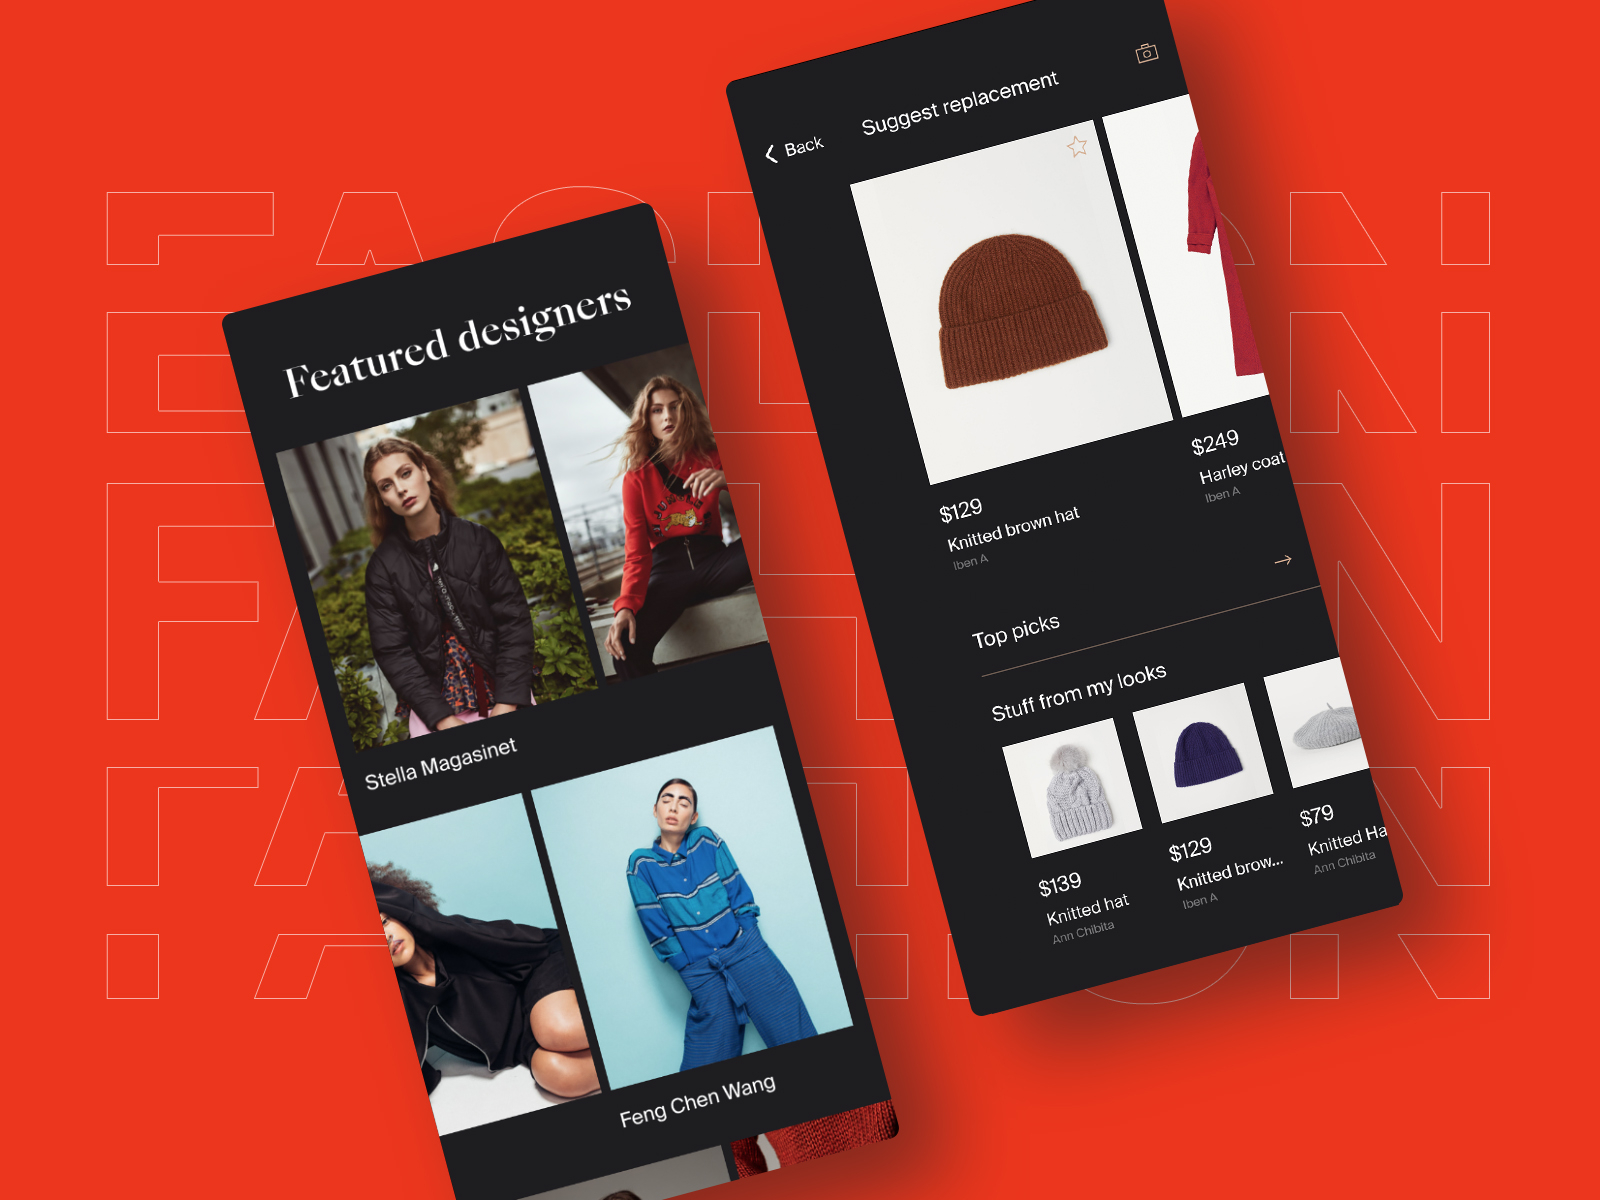 Fashion app catalog by Lay on Dribbble